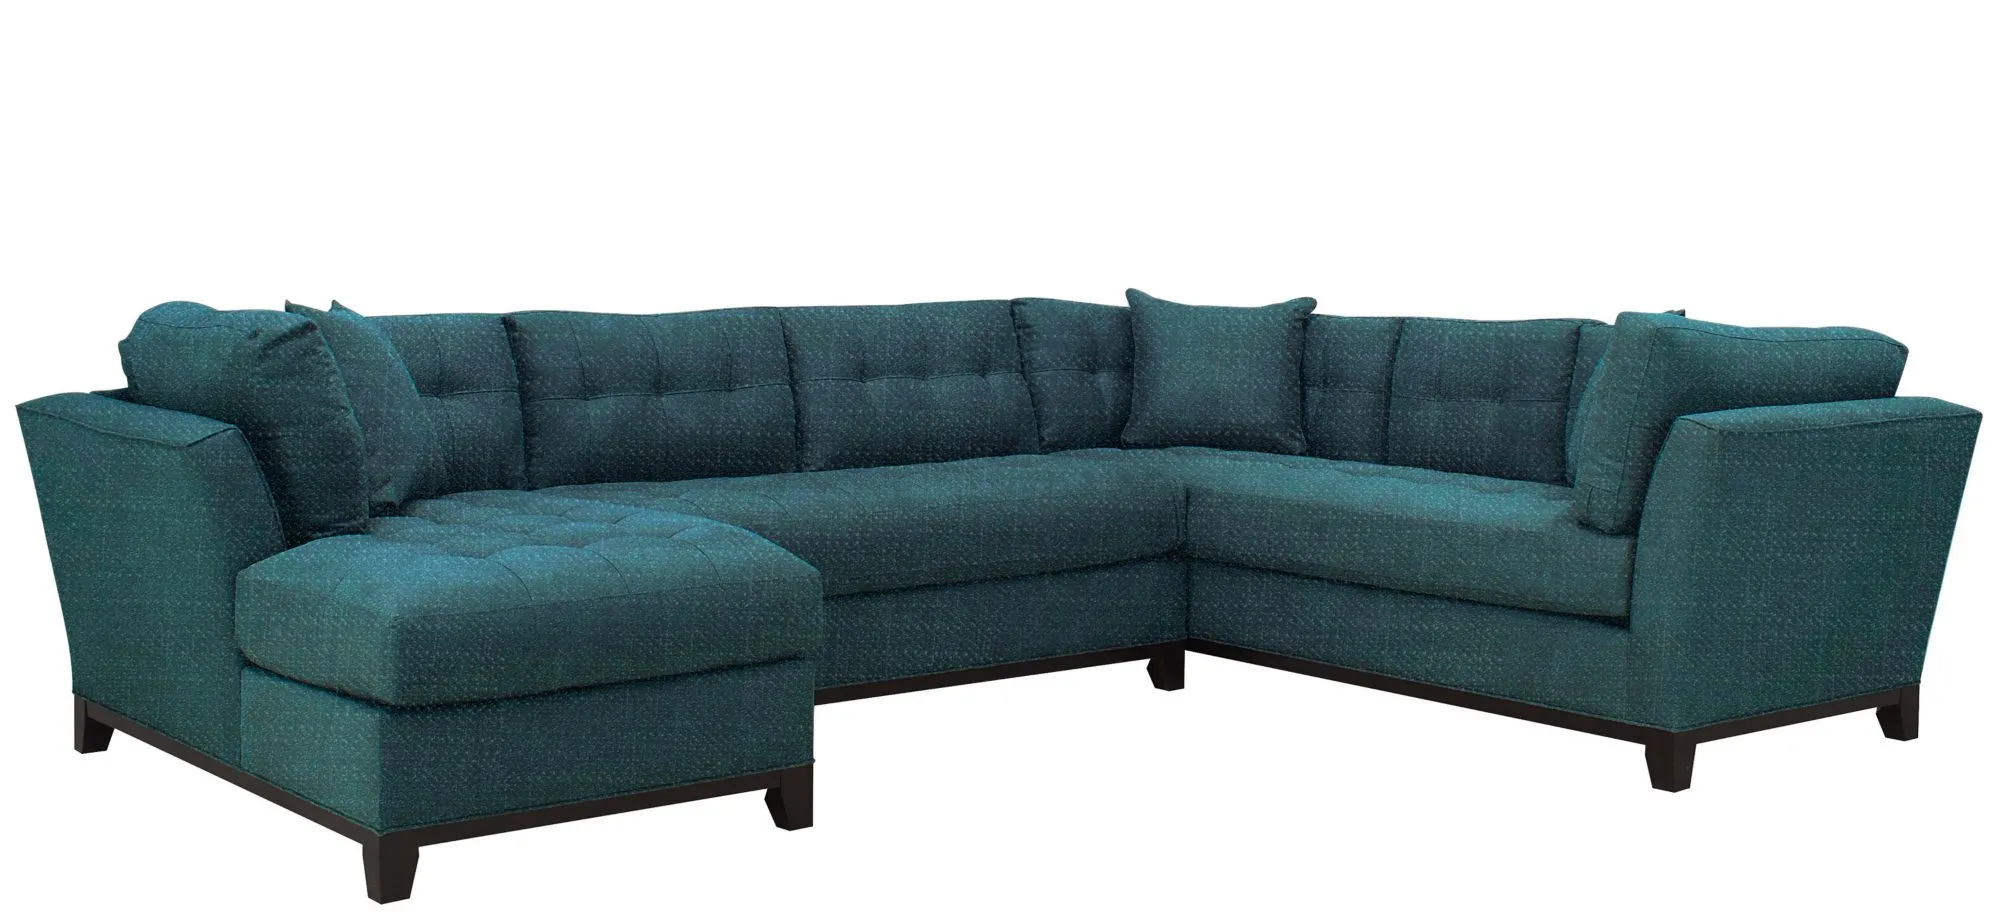 Cityscape 4-pc. Sectional in Elliot Teal by H.M. Richards